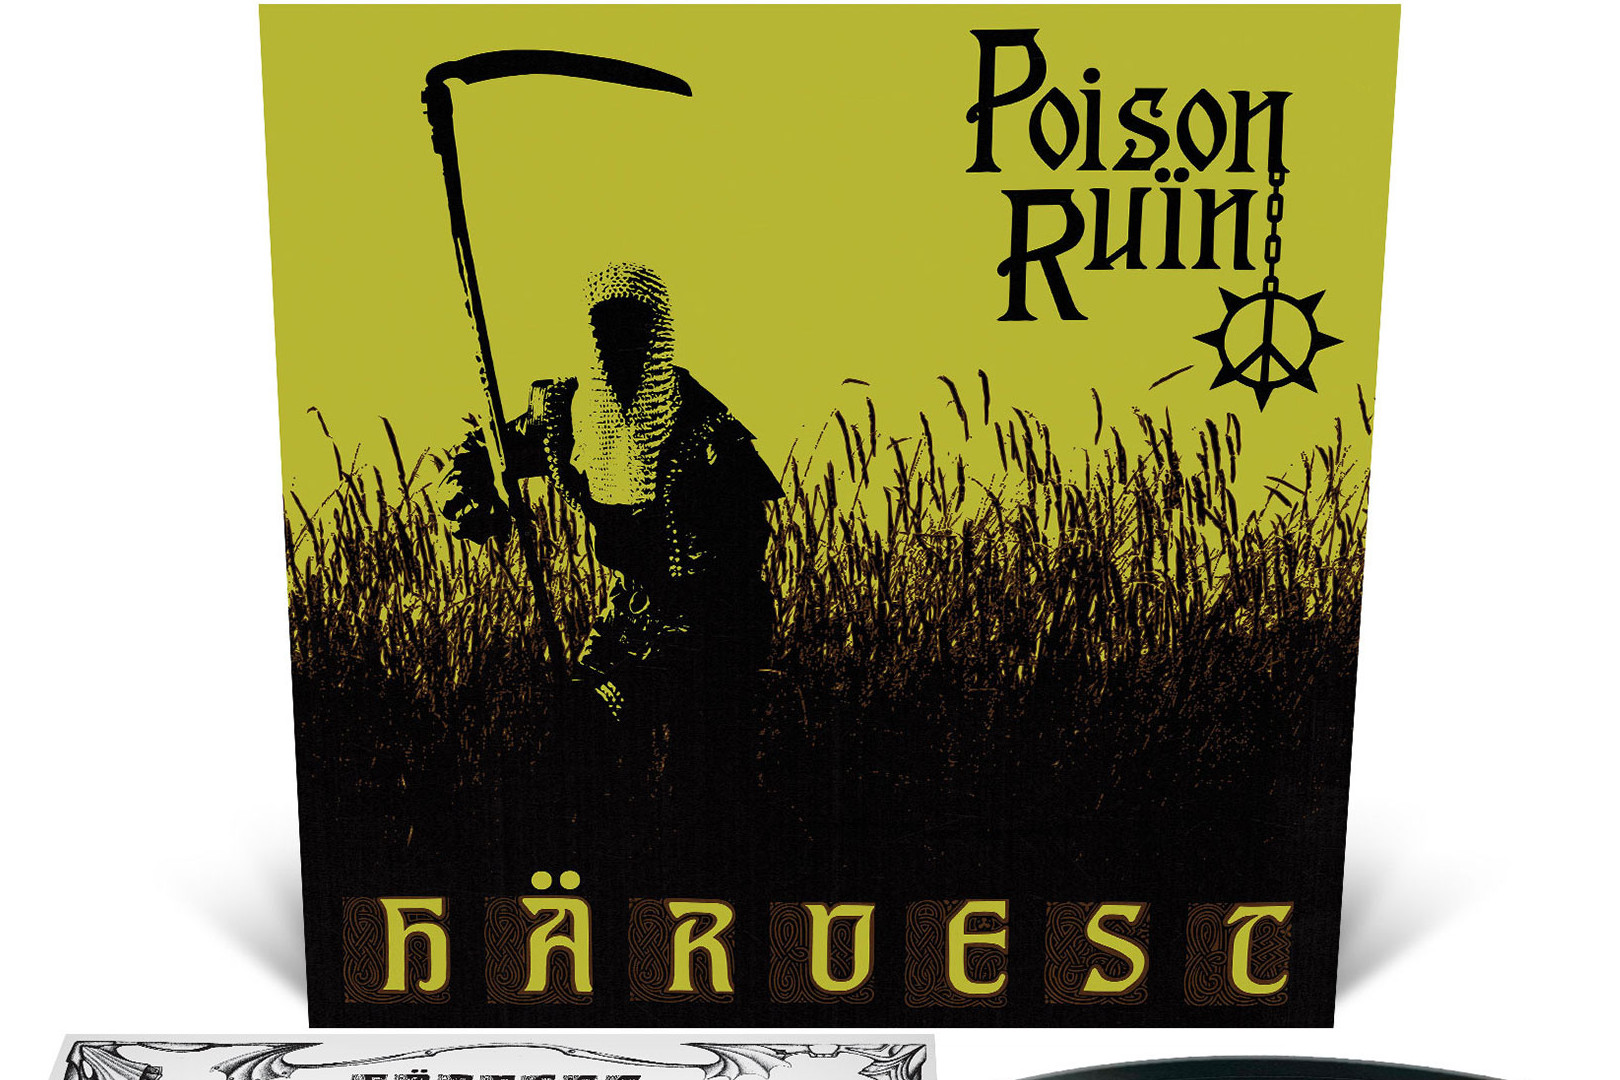 Poison Ruin to release new album on Relapse